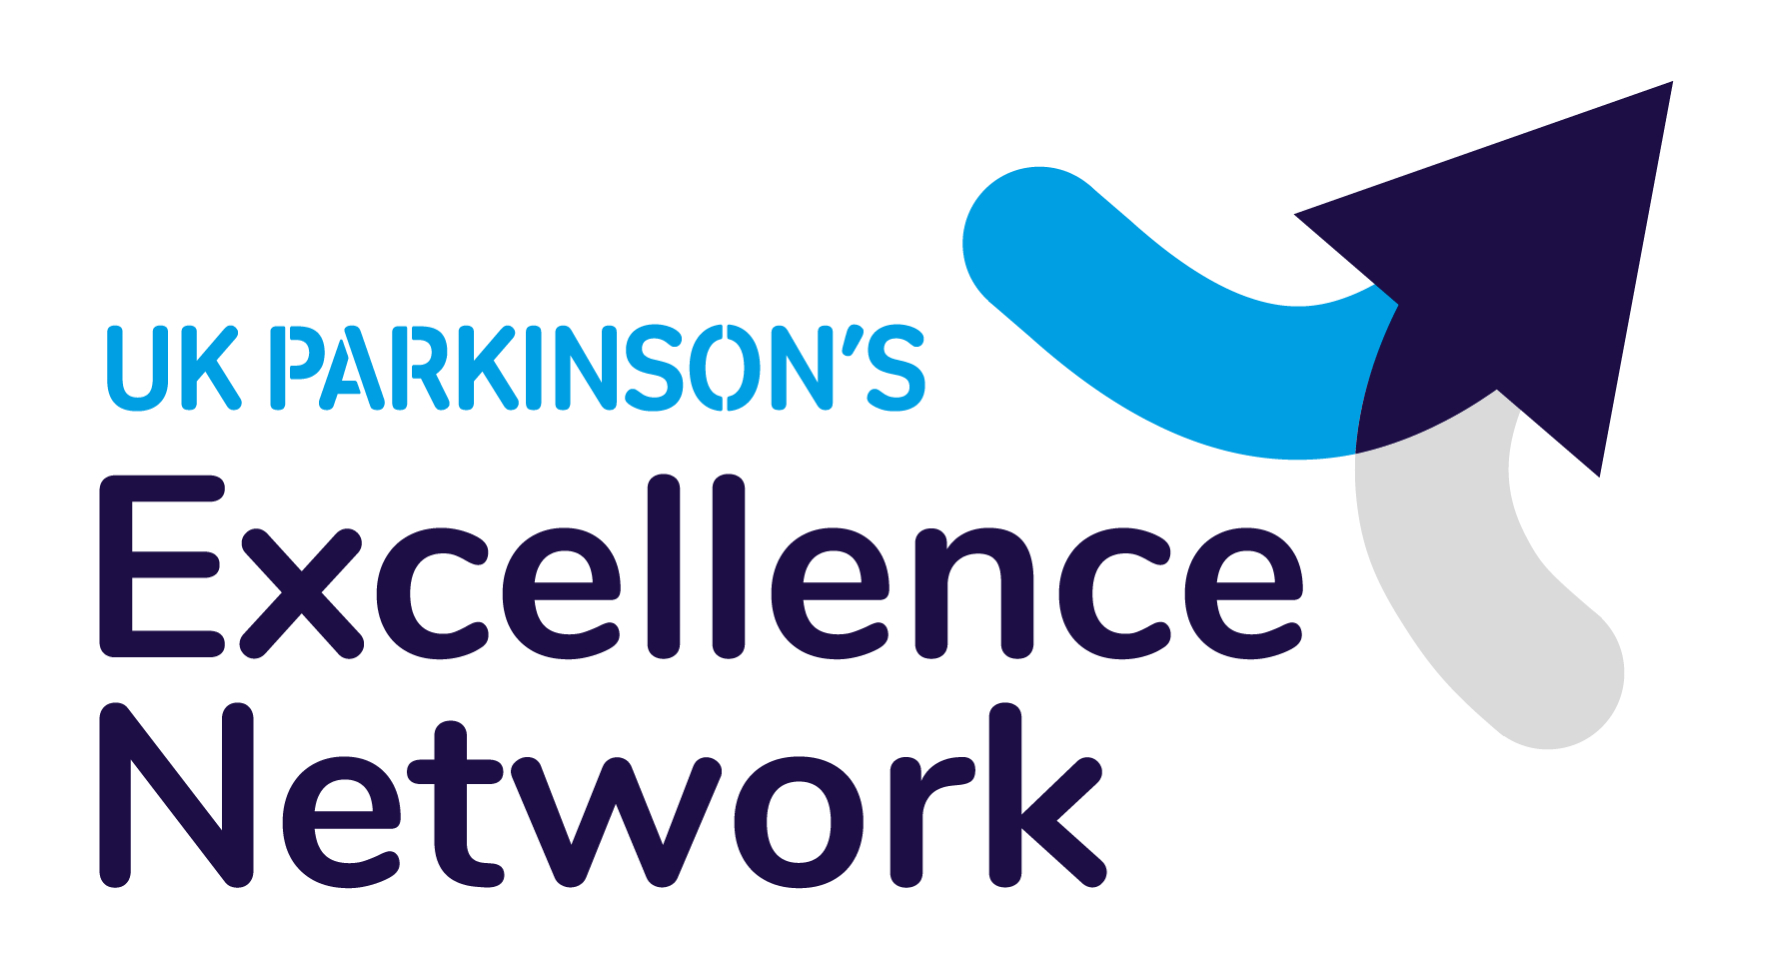 UK Parkinson's Excellence Network logo with arrows